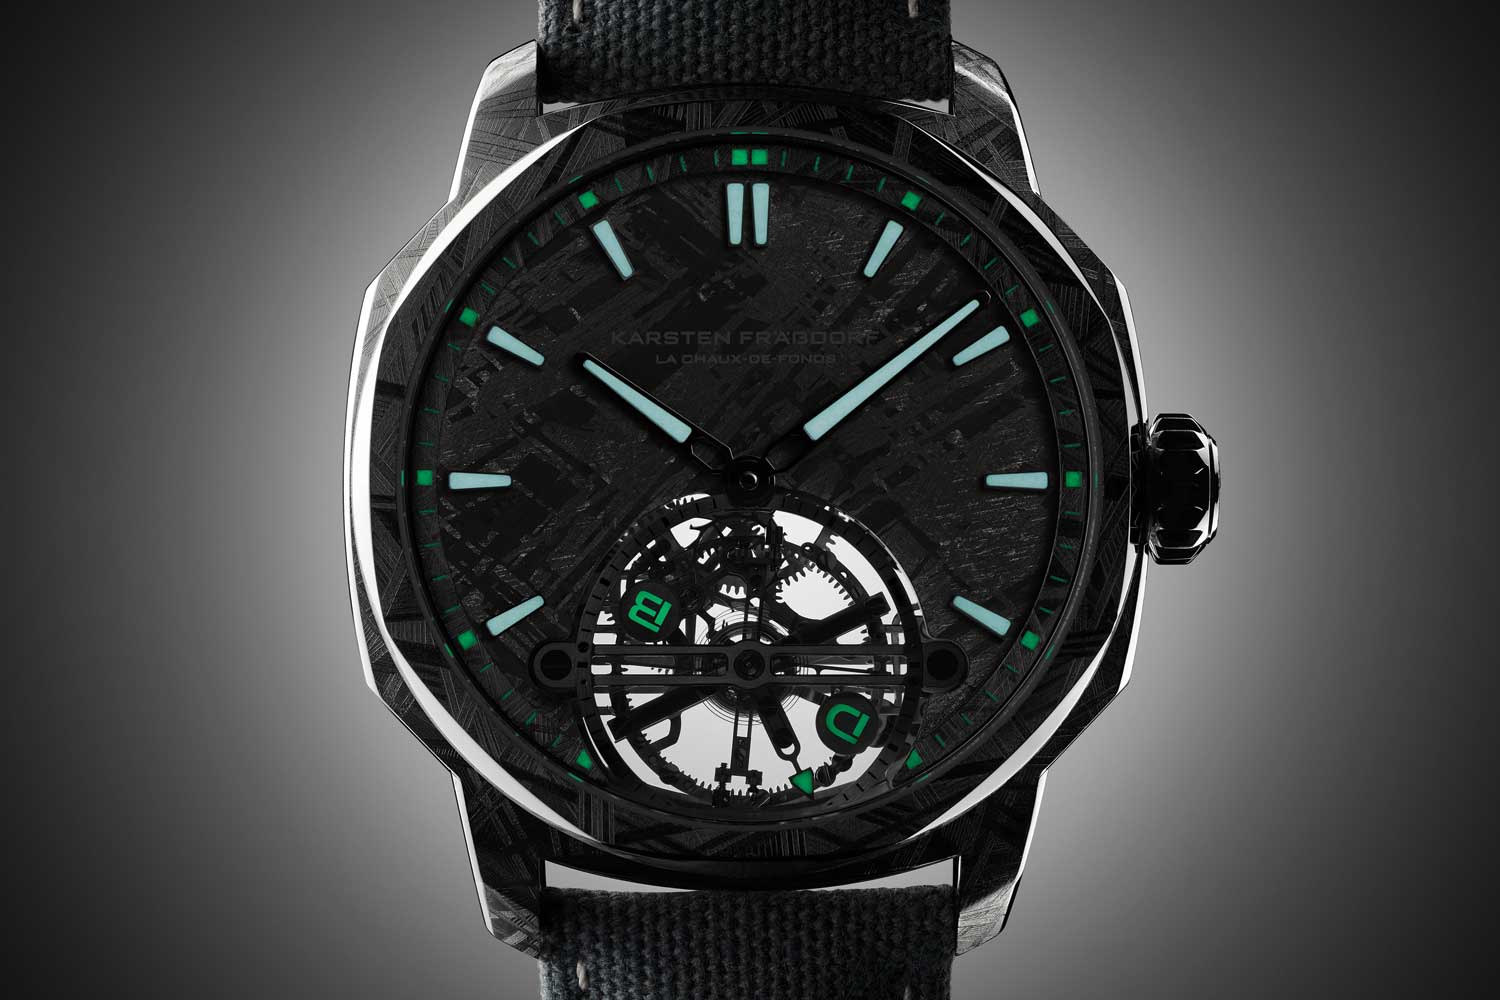 The luminous applications in the watch